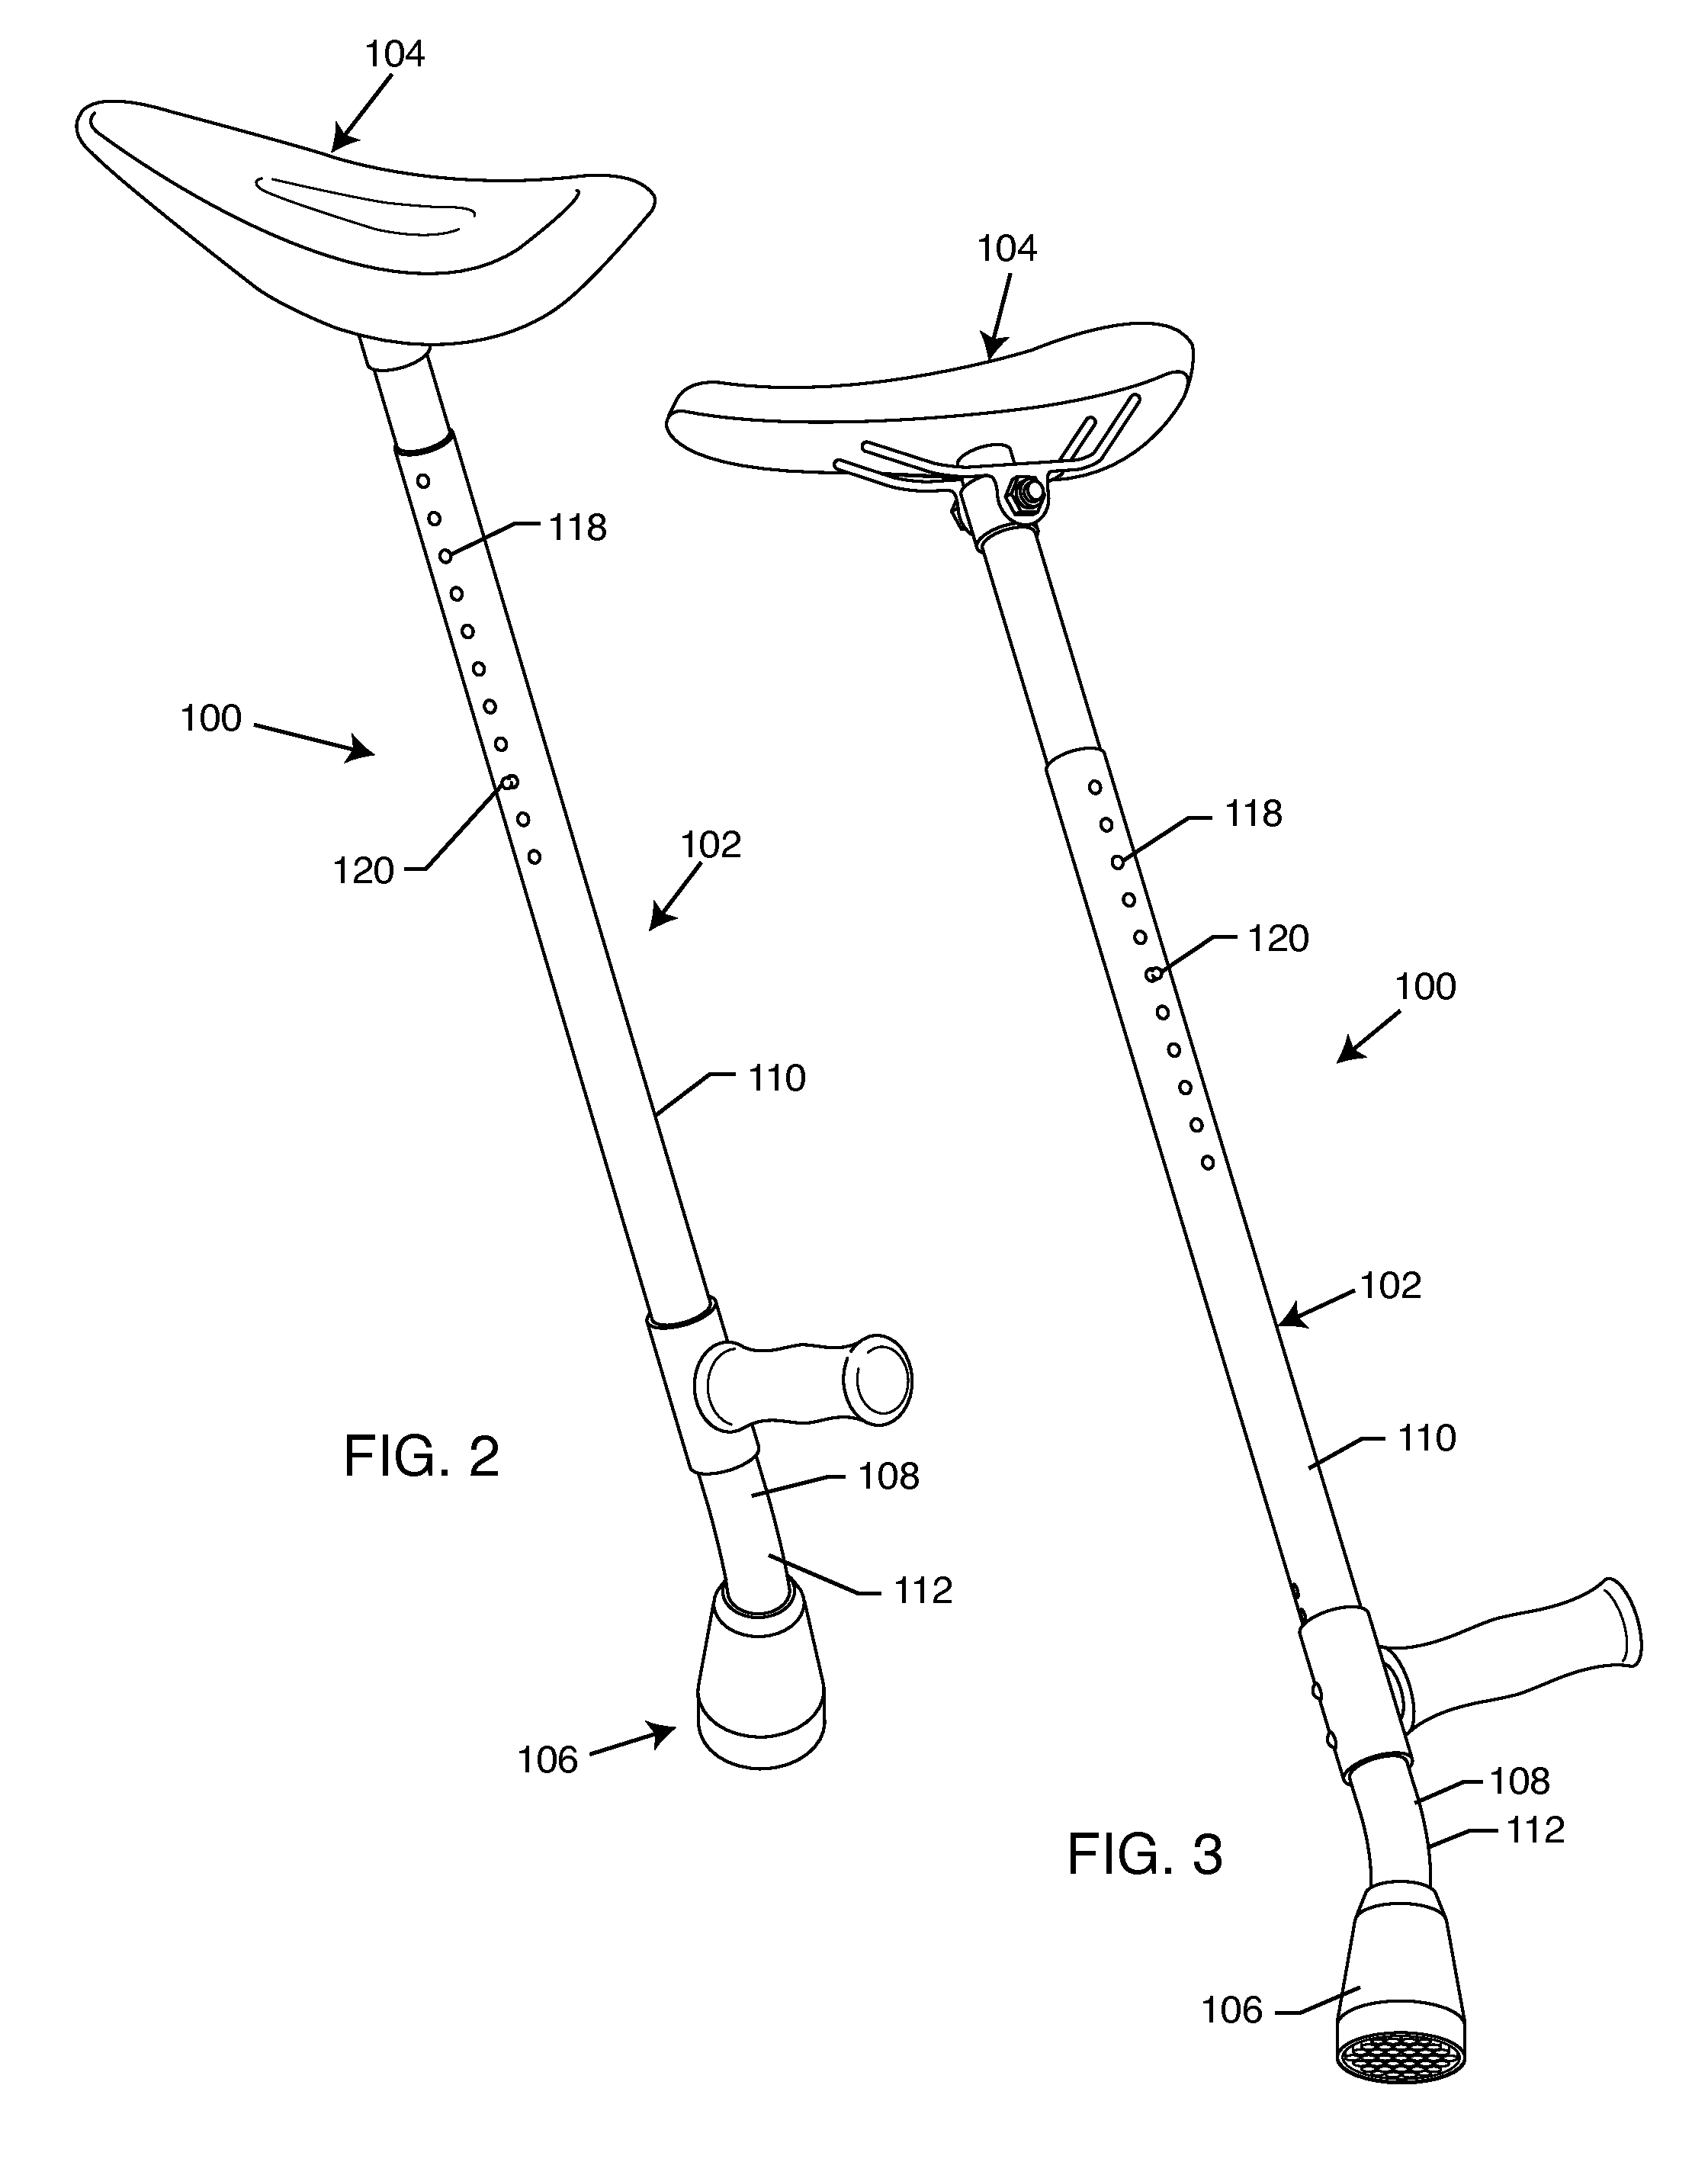 Personal support device